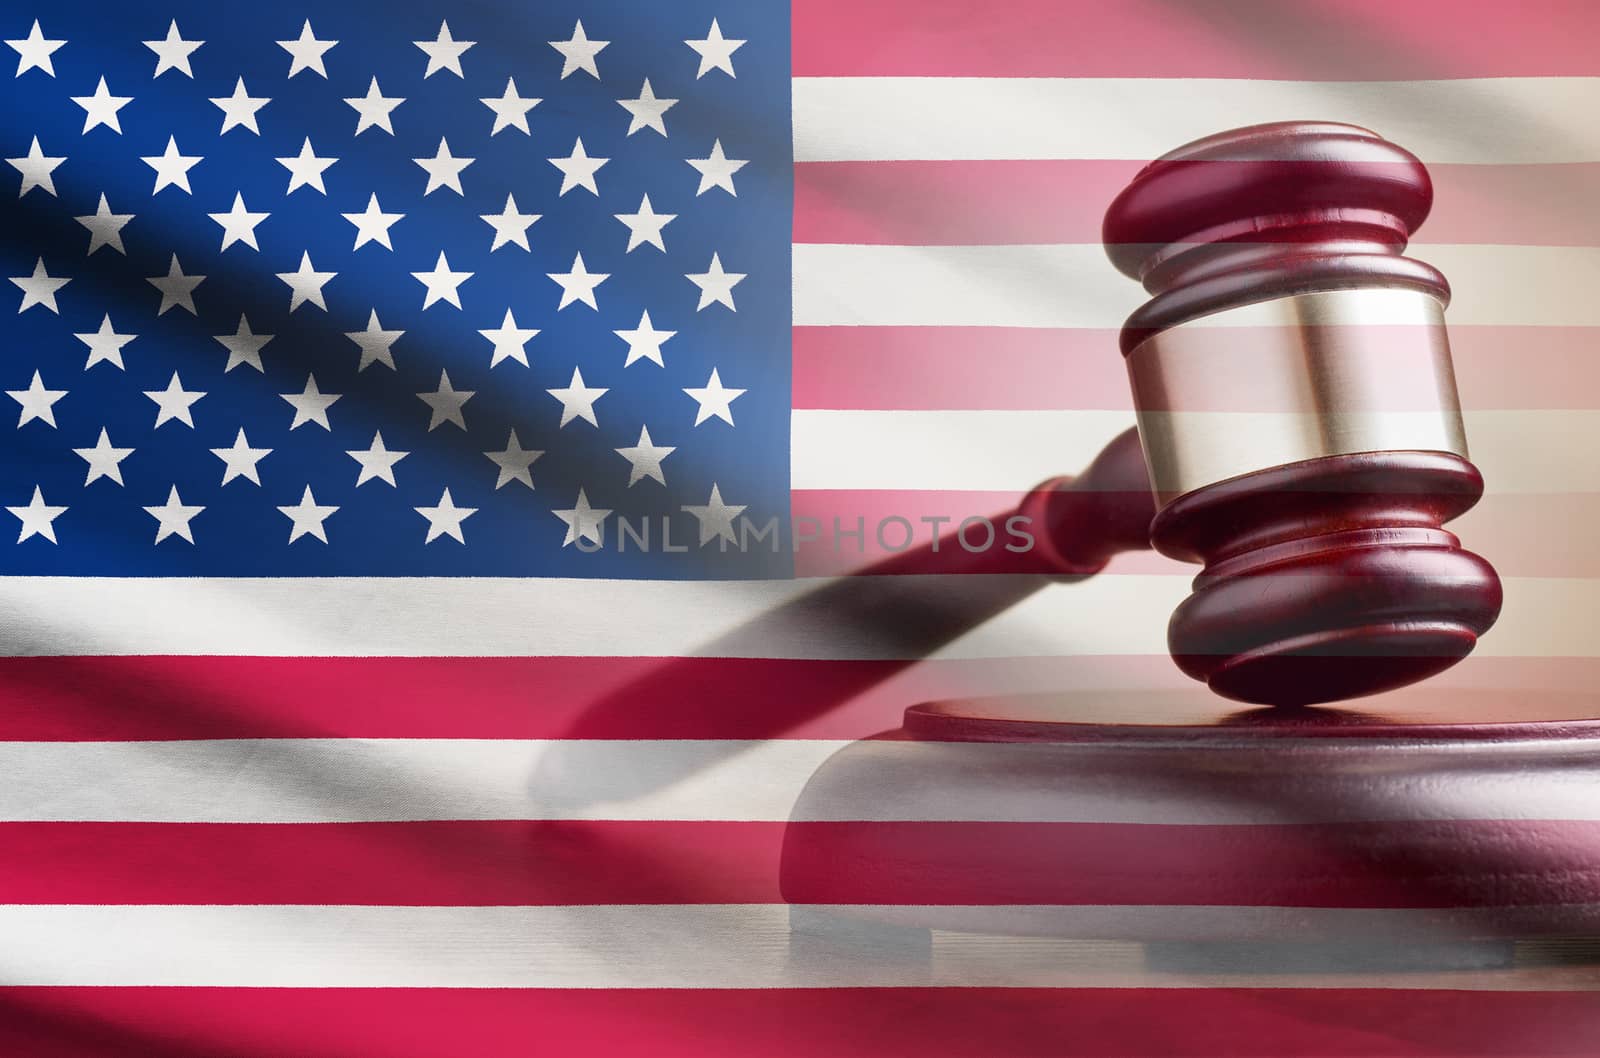 Legal gavel on its plinth over a flag of the USA in a conceptual composite image